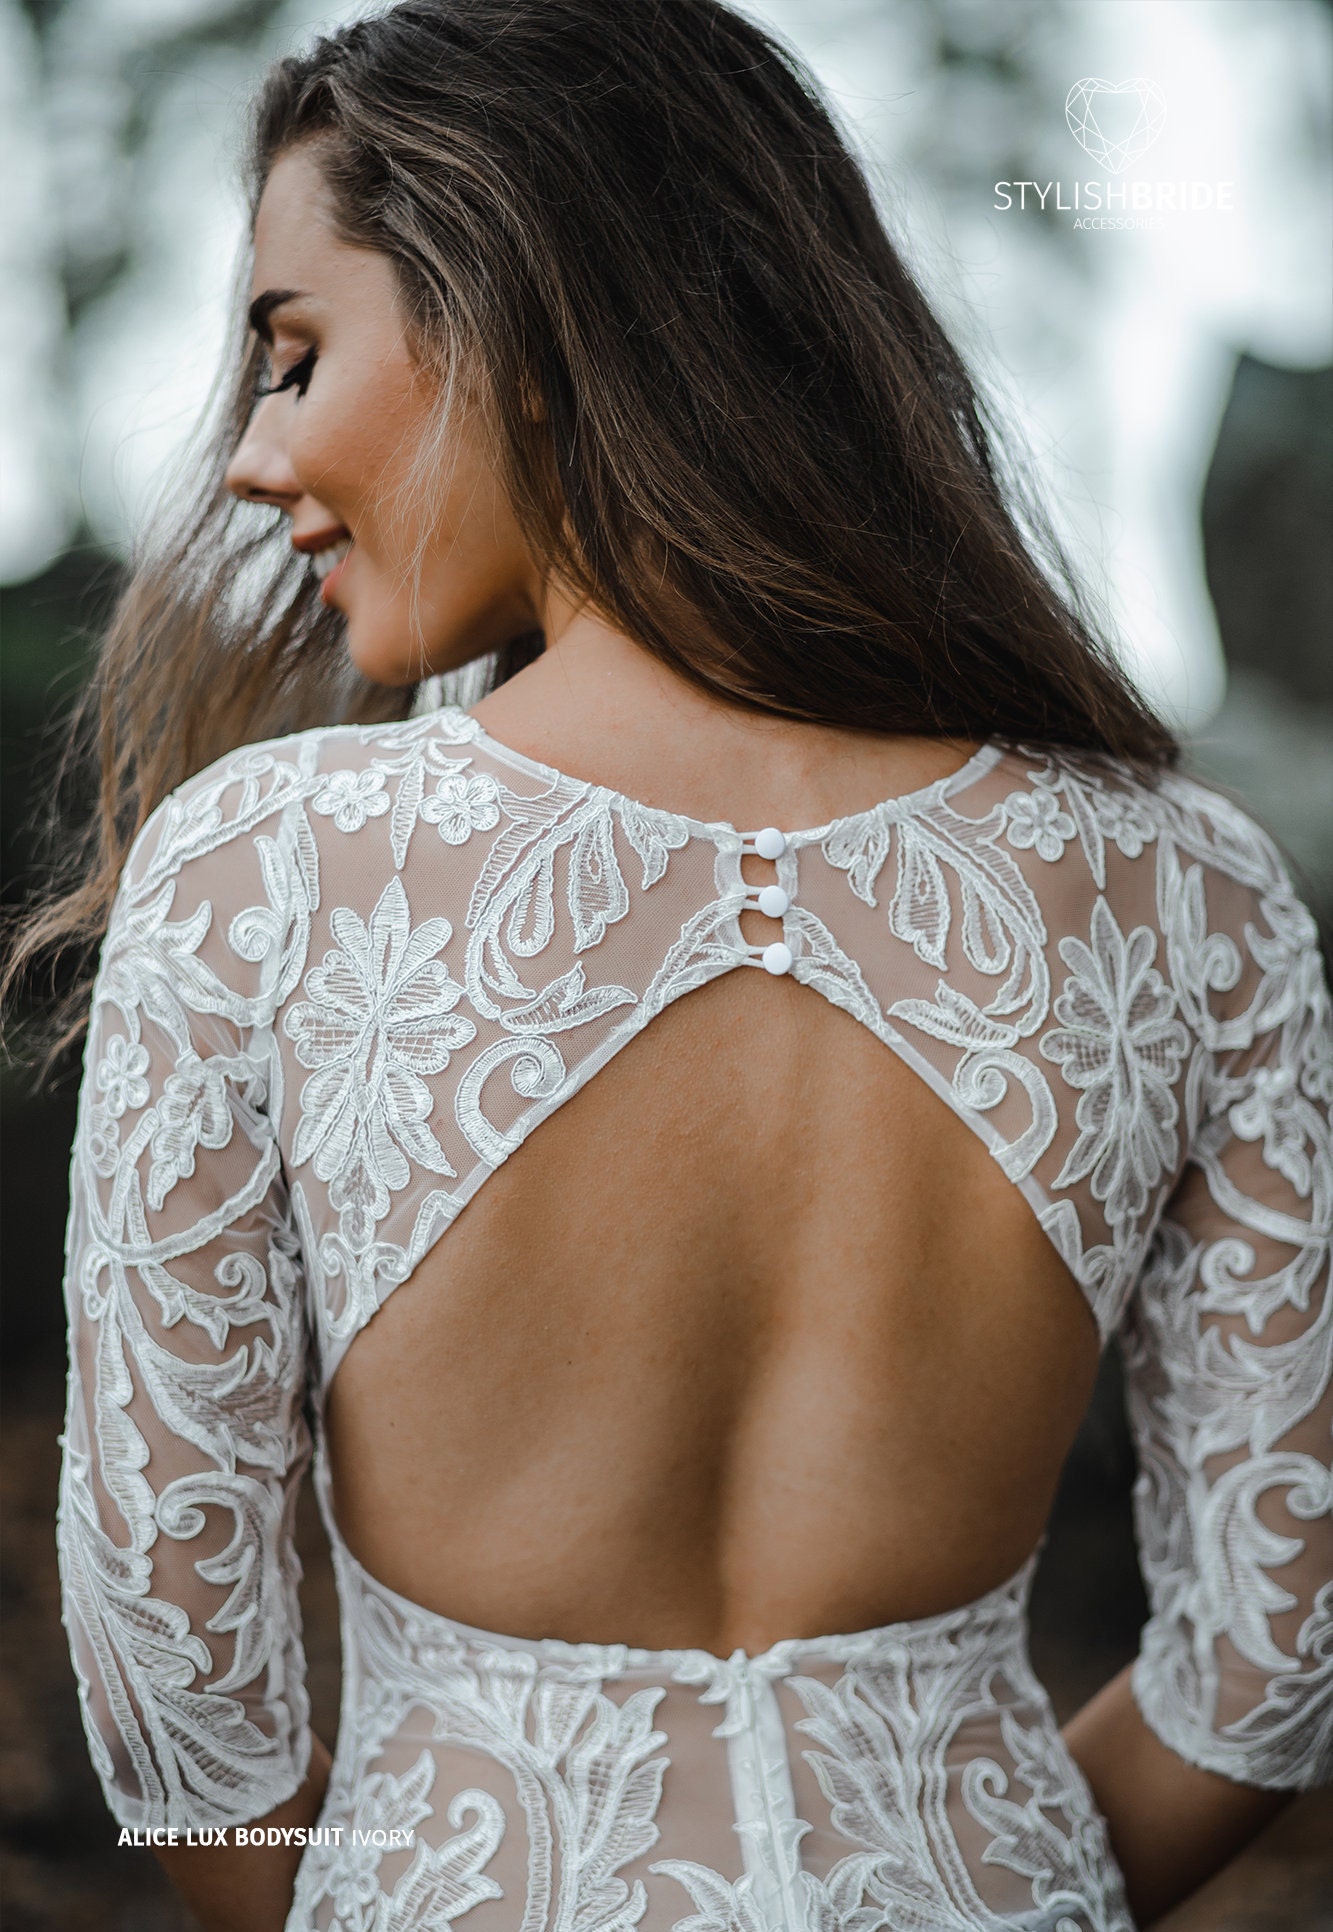 Wedding Lace Bodysuit With Long Sleeves and Open Back, Lace Bridal Bodysuit  With Low Back, Wedding Separates Dress, Boho Lace Wedding Top -  Canada